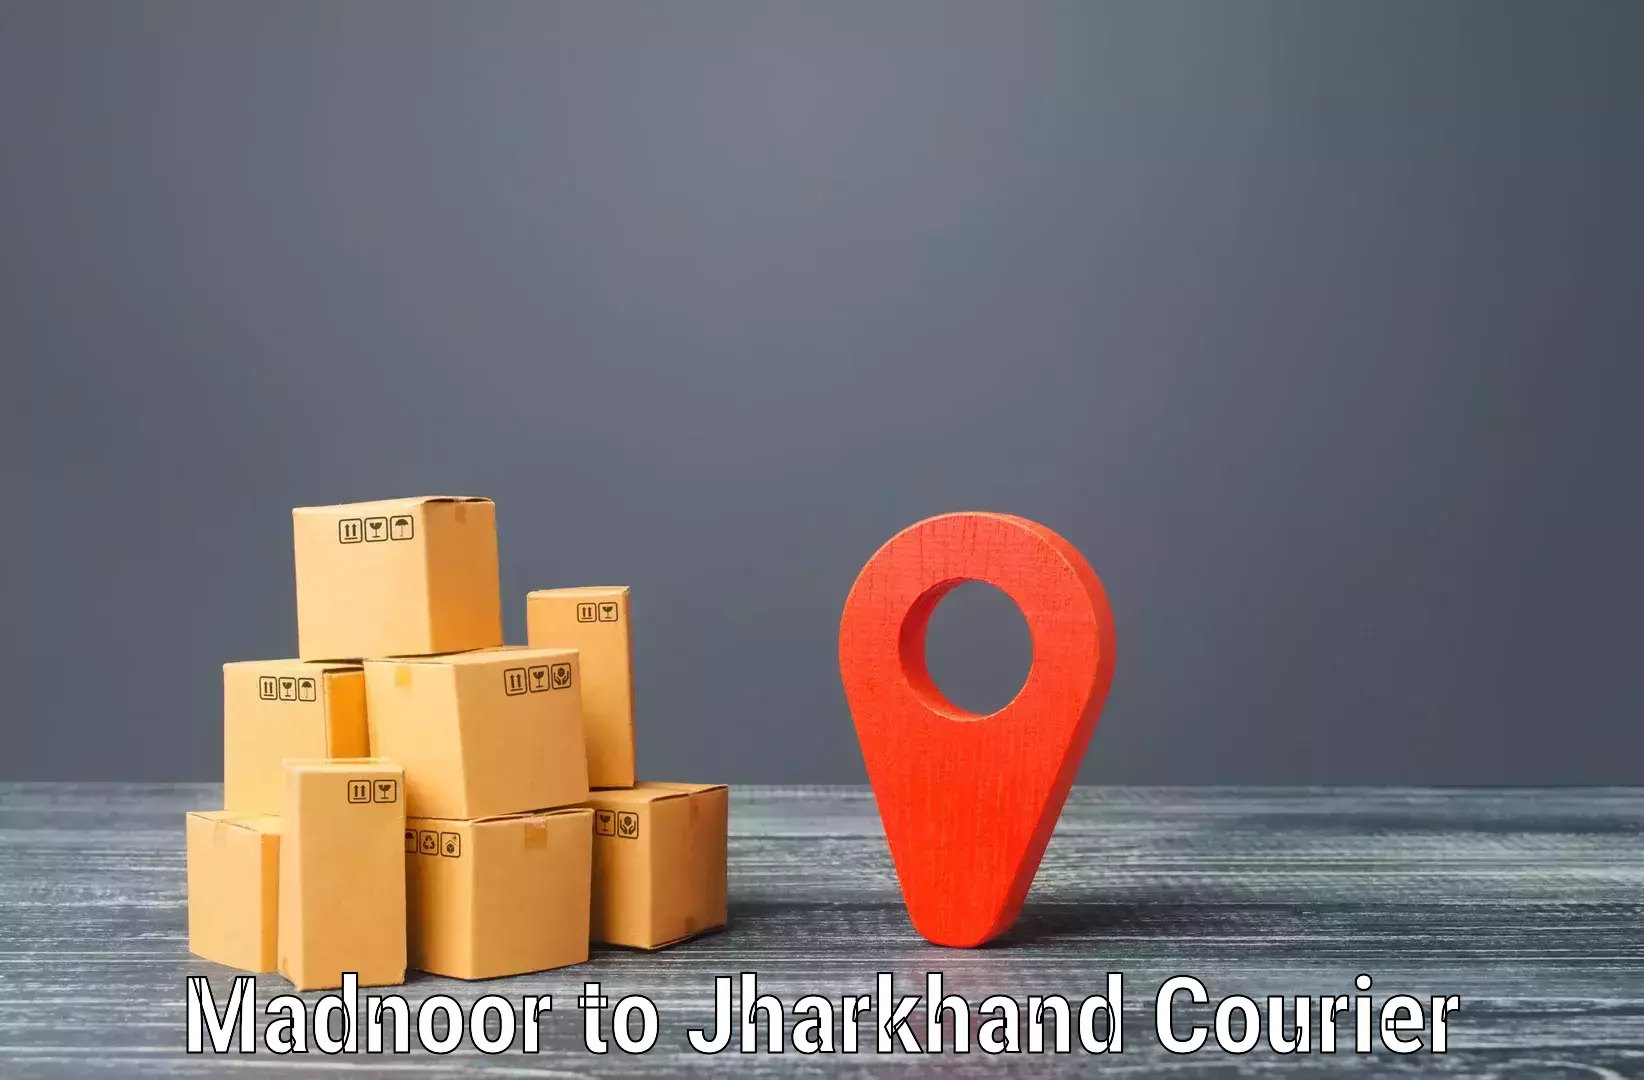 Nationwide shipping services Madnoor to Jamshedpur